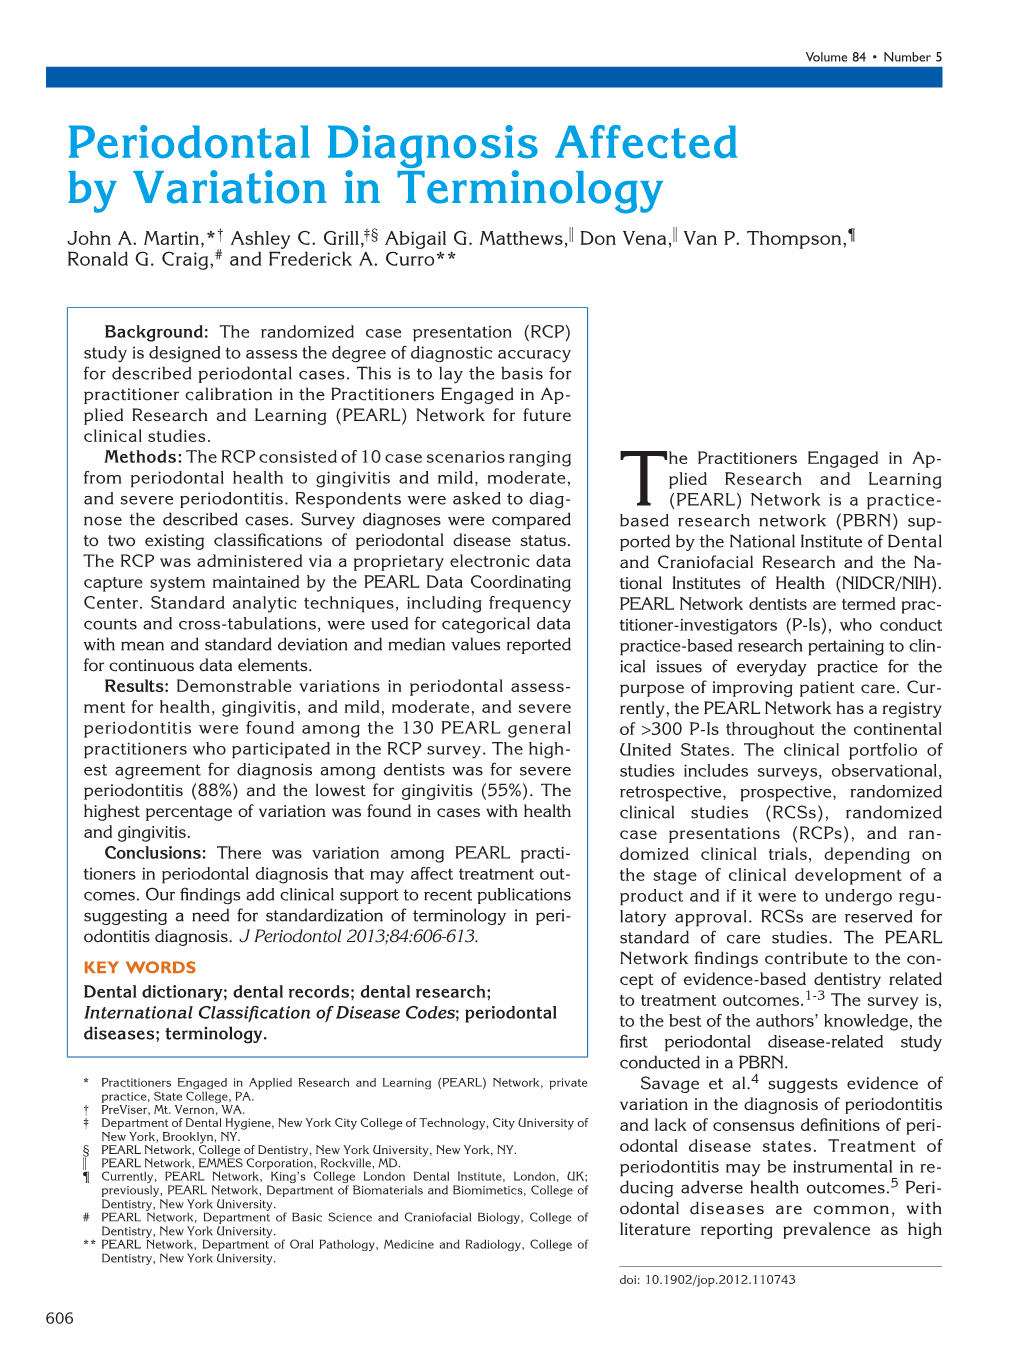 Periodontal Diagnosis Affected by Variation in Terminology